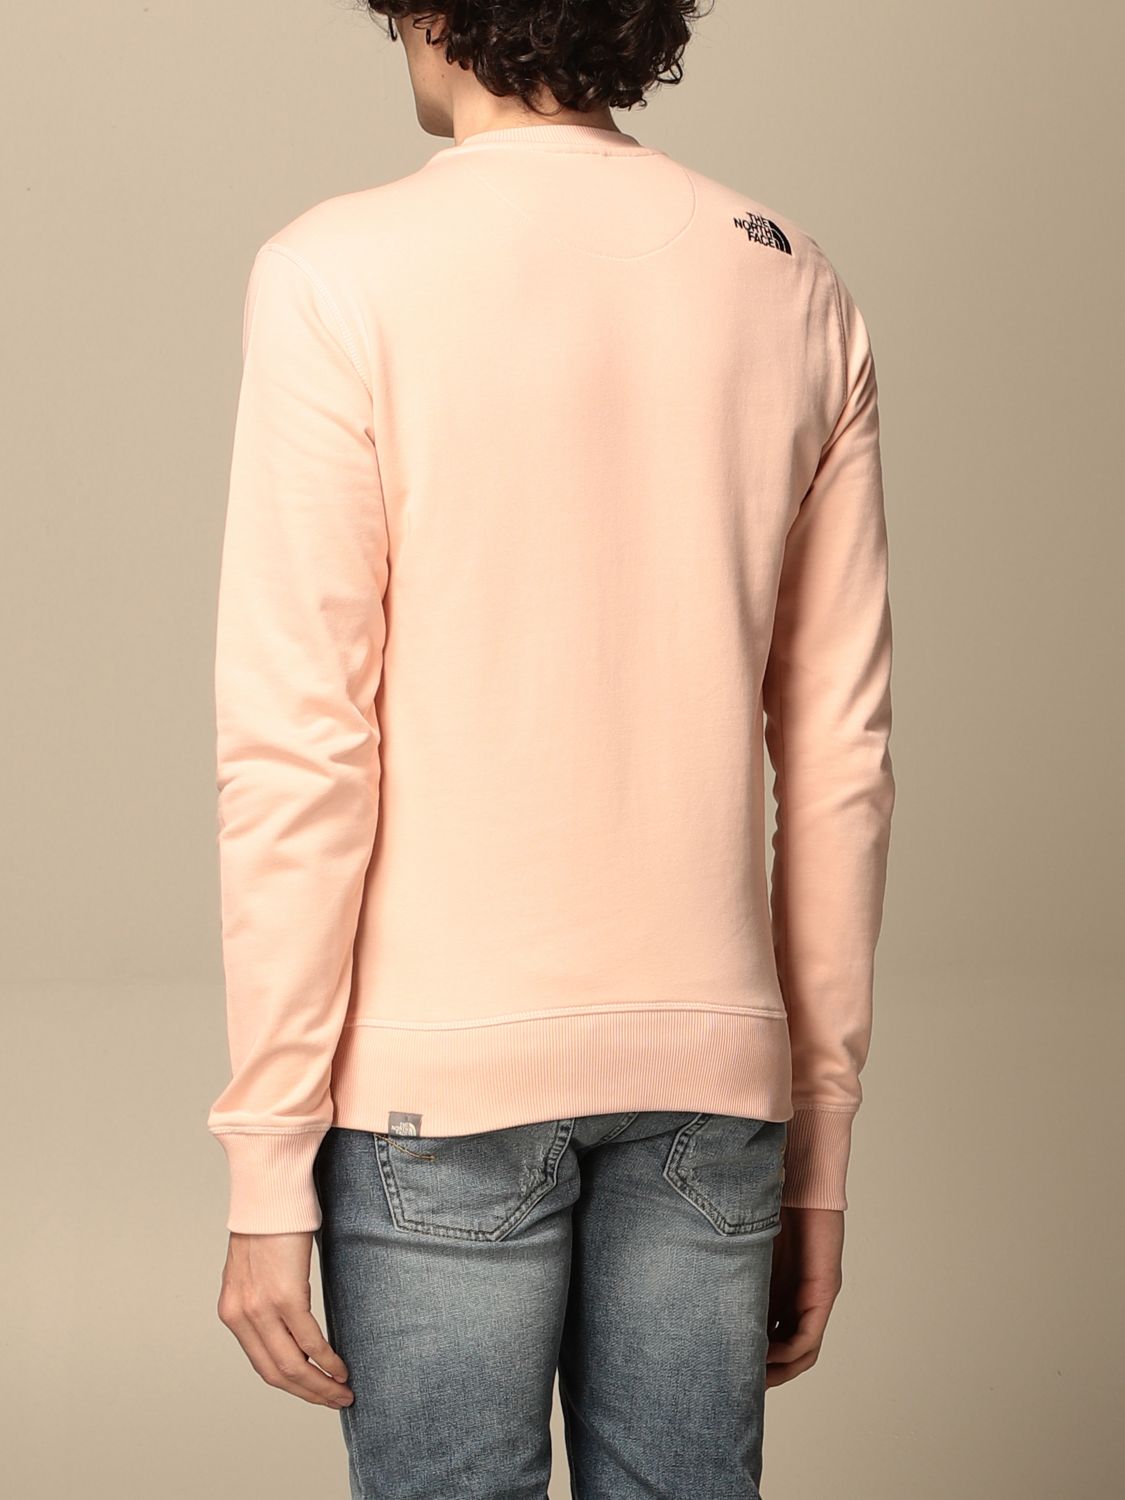 Sweatshirt The North Face: Sweatshirt homme The North Face rose 2